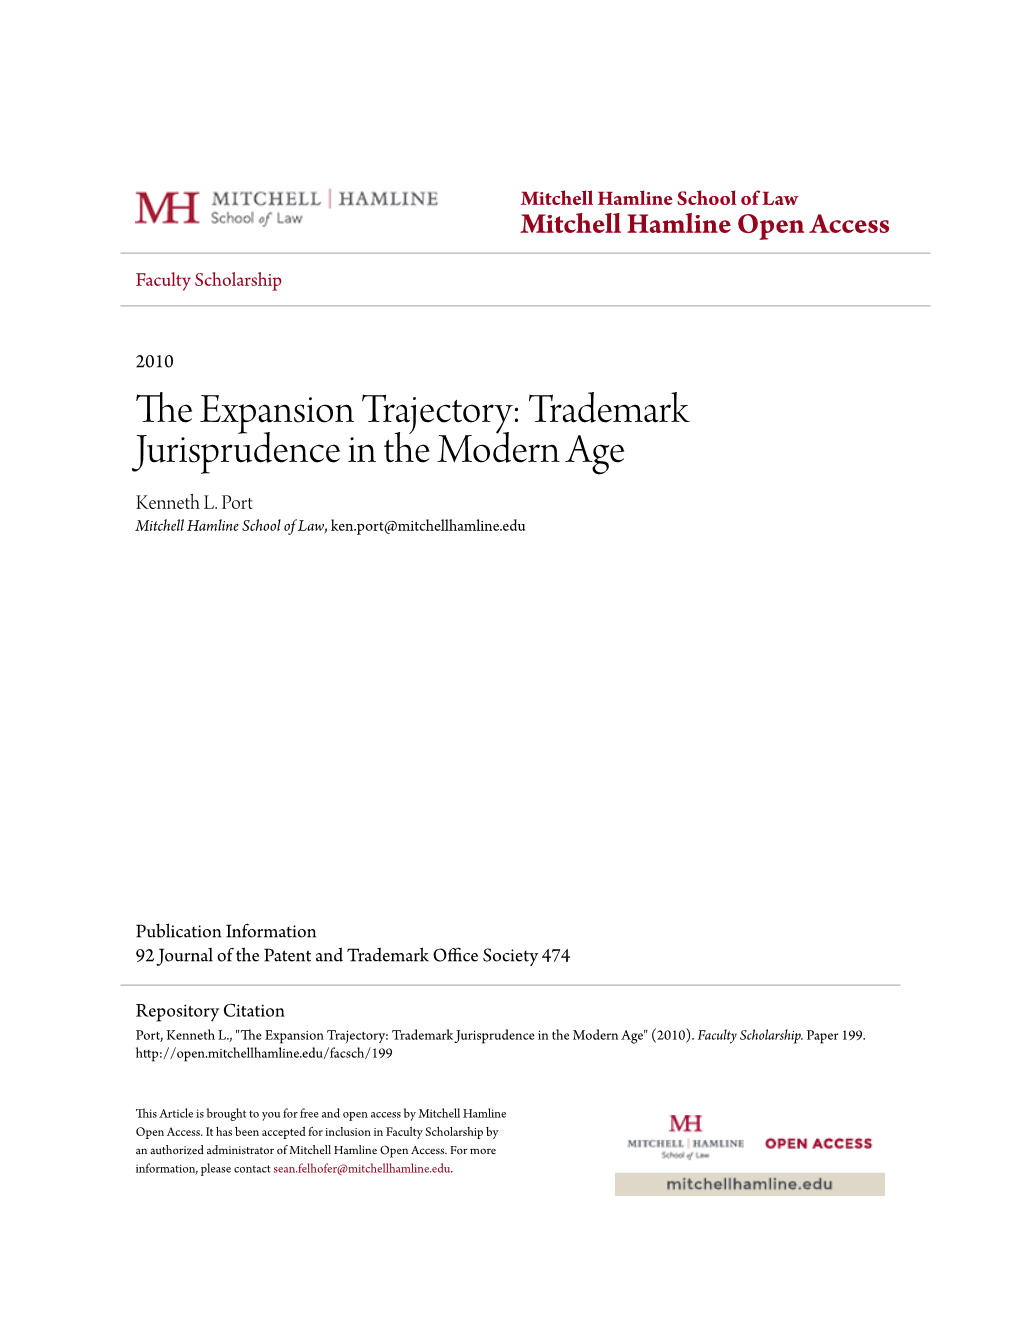 The Expansion Trajectory: Trademark Jurisprudence in the Modern Age Kenneth L